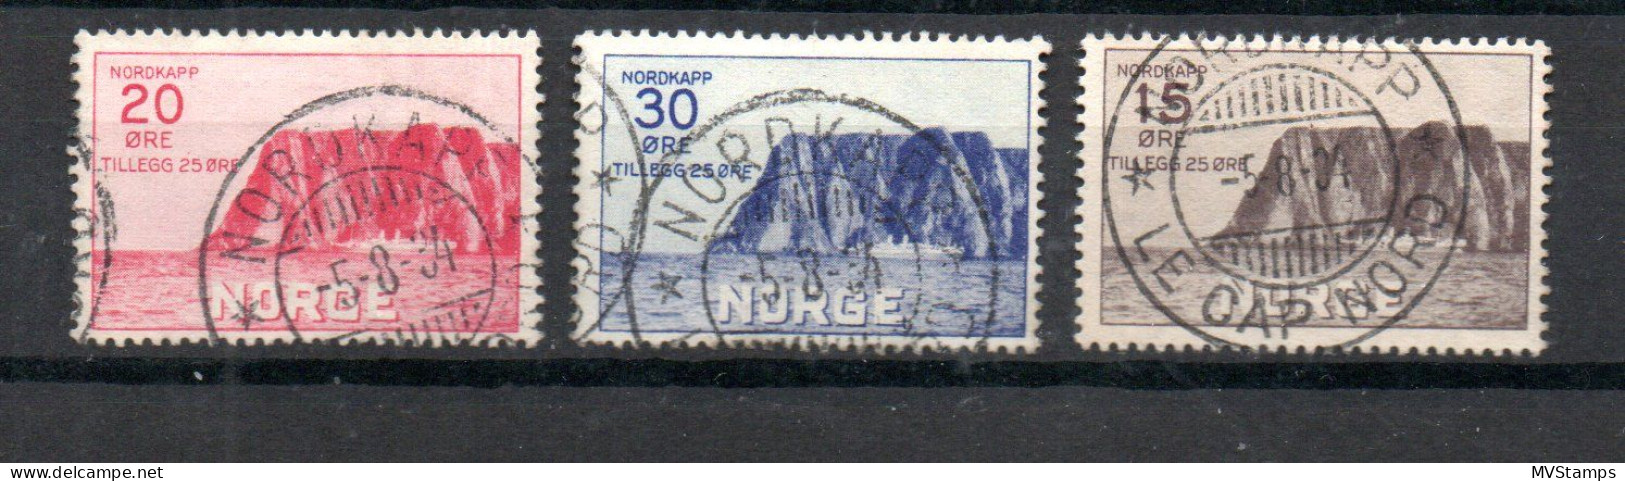 Norway 1930 Old Set Northcape Stamps (Michel 159/61) Nice Used Nordkap - Used Stamps